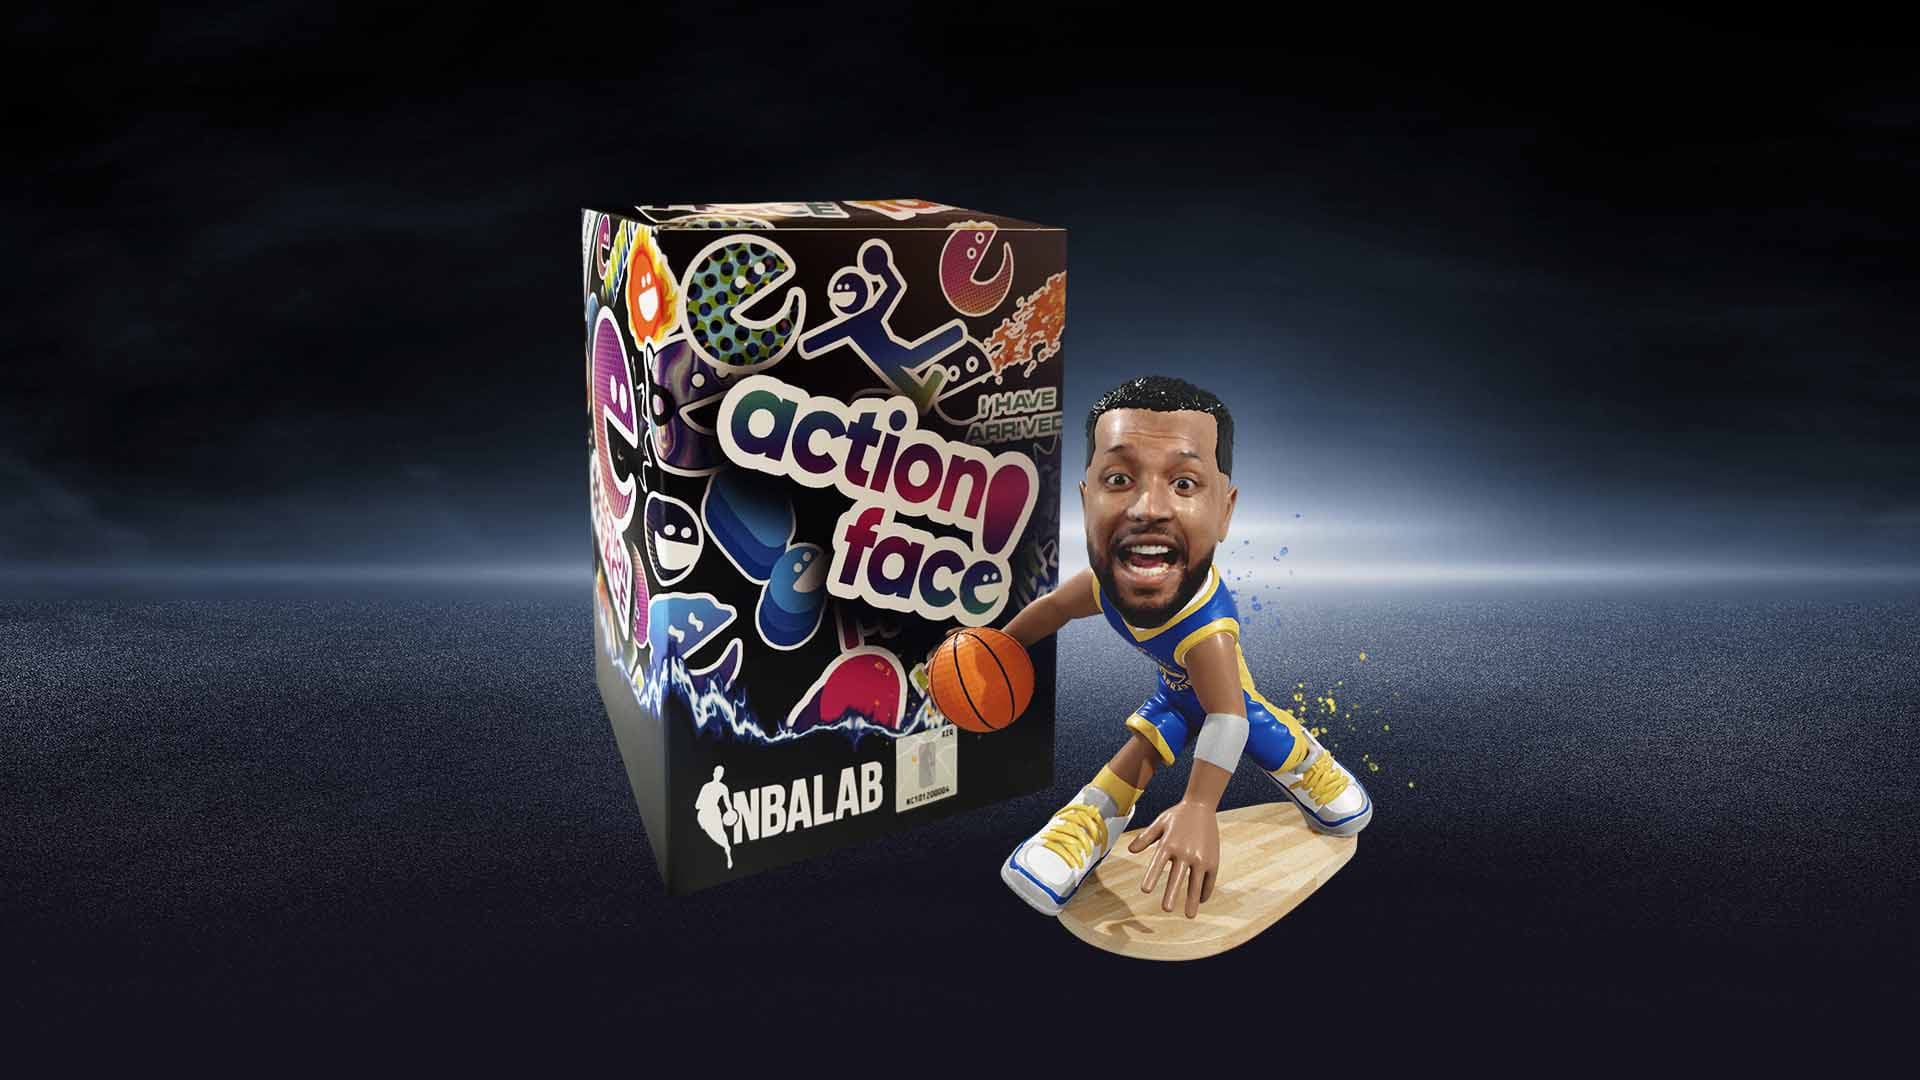 Action Face NBA figure and stylish packaging